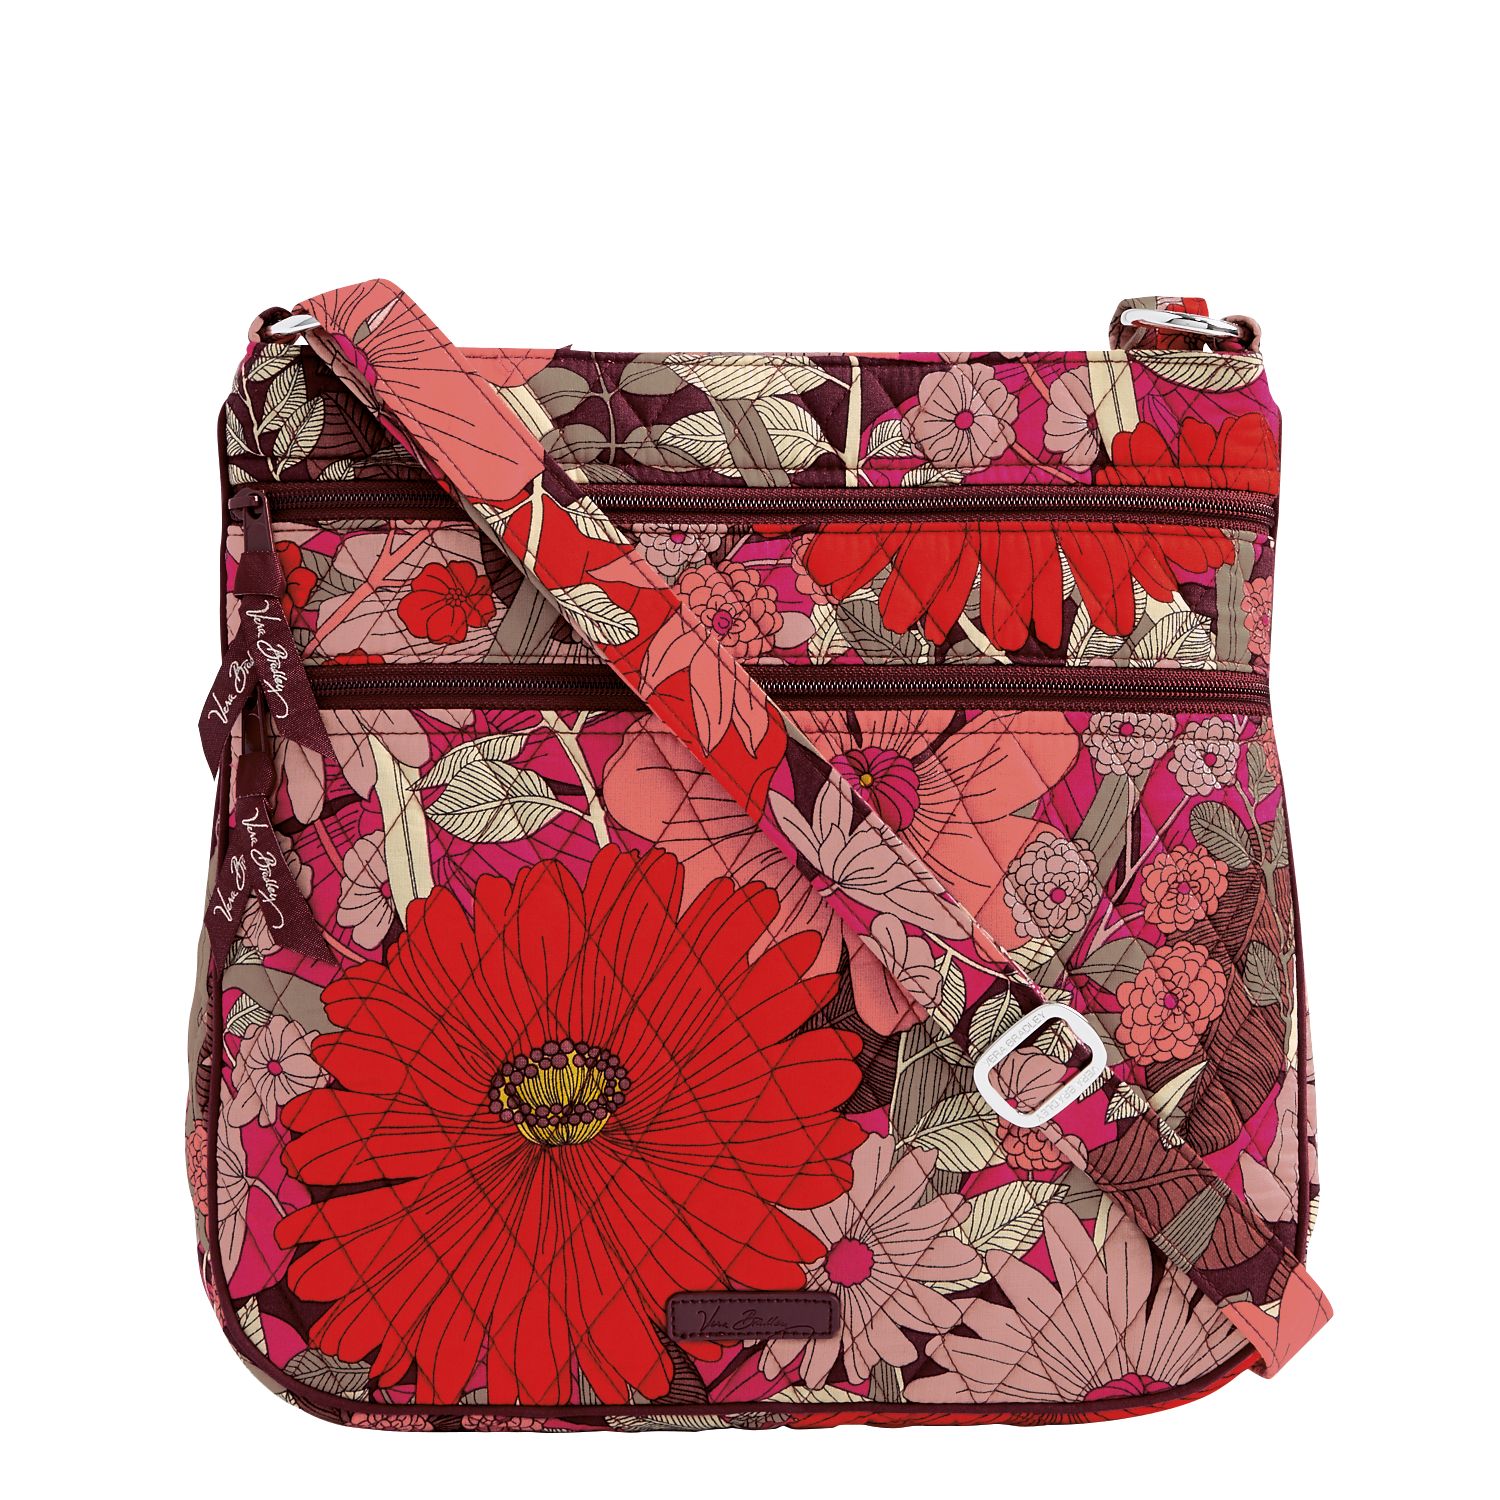 Vera Bradley Coupon Code: Get Your gifts by Christmas